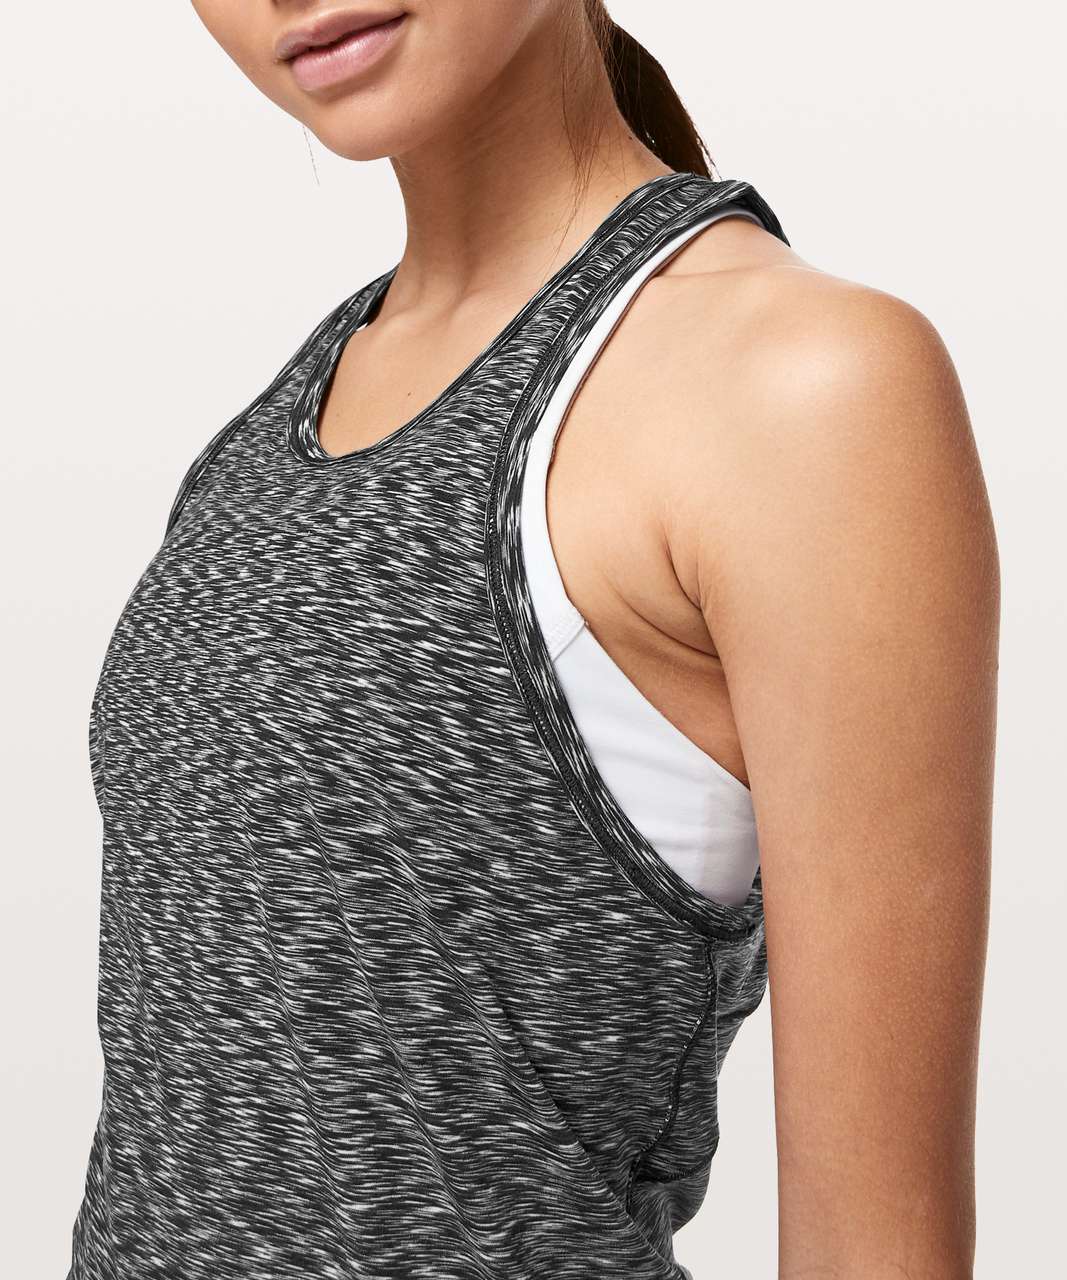 Lululemon Goal Up Tank - Spaced Out Space Dye Black White